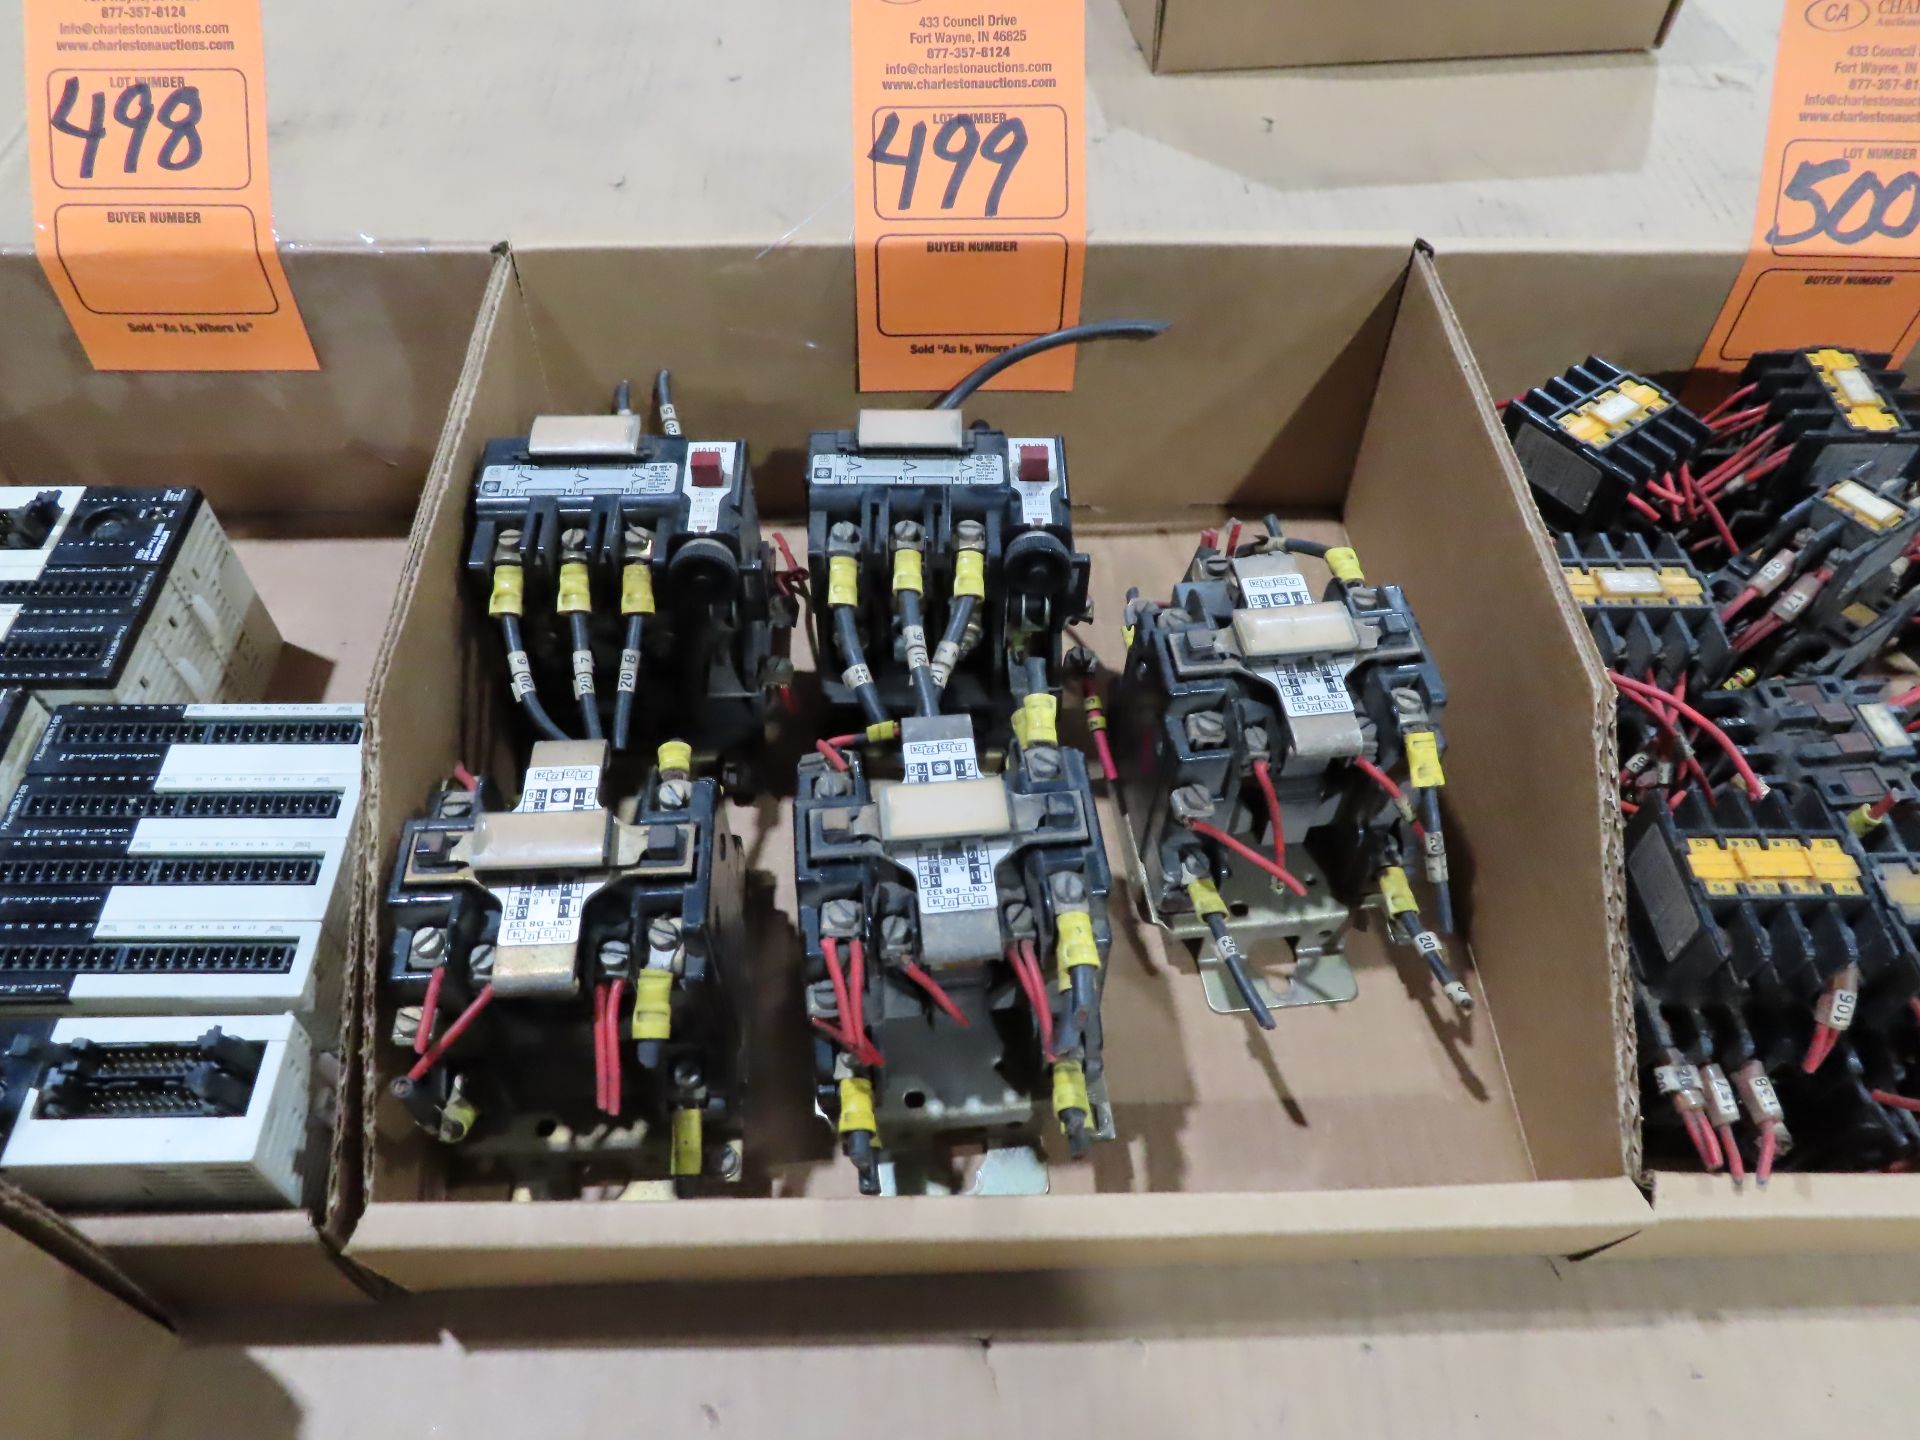 Large Qty of telemecanique contactors/relays, as always with Brolyn LLC auctions, all lots can be